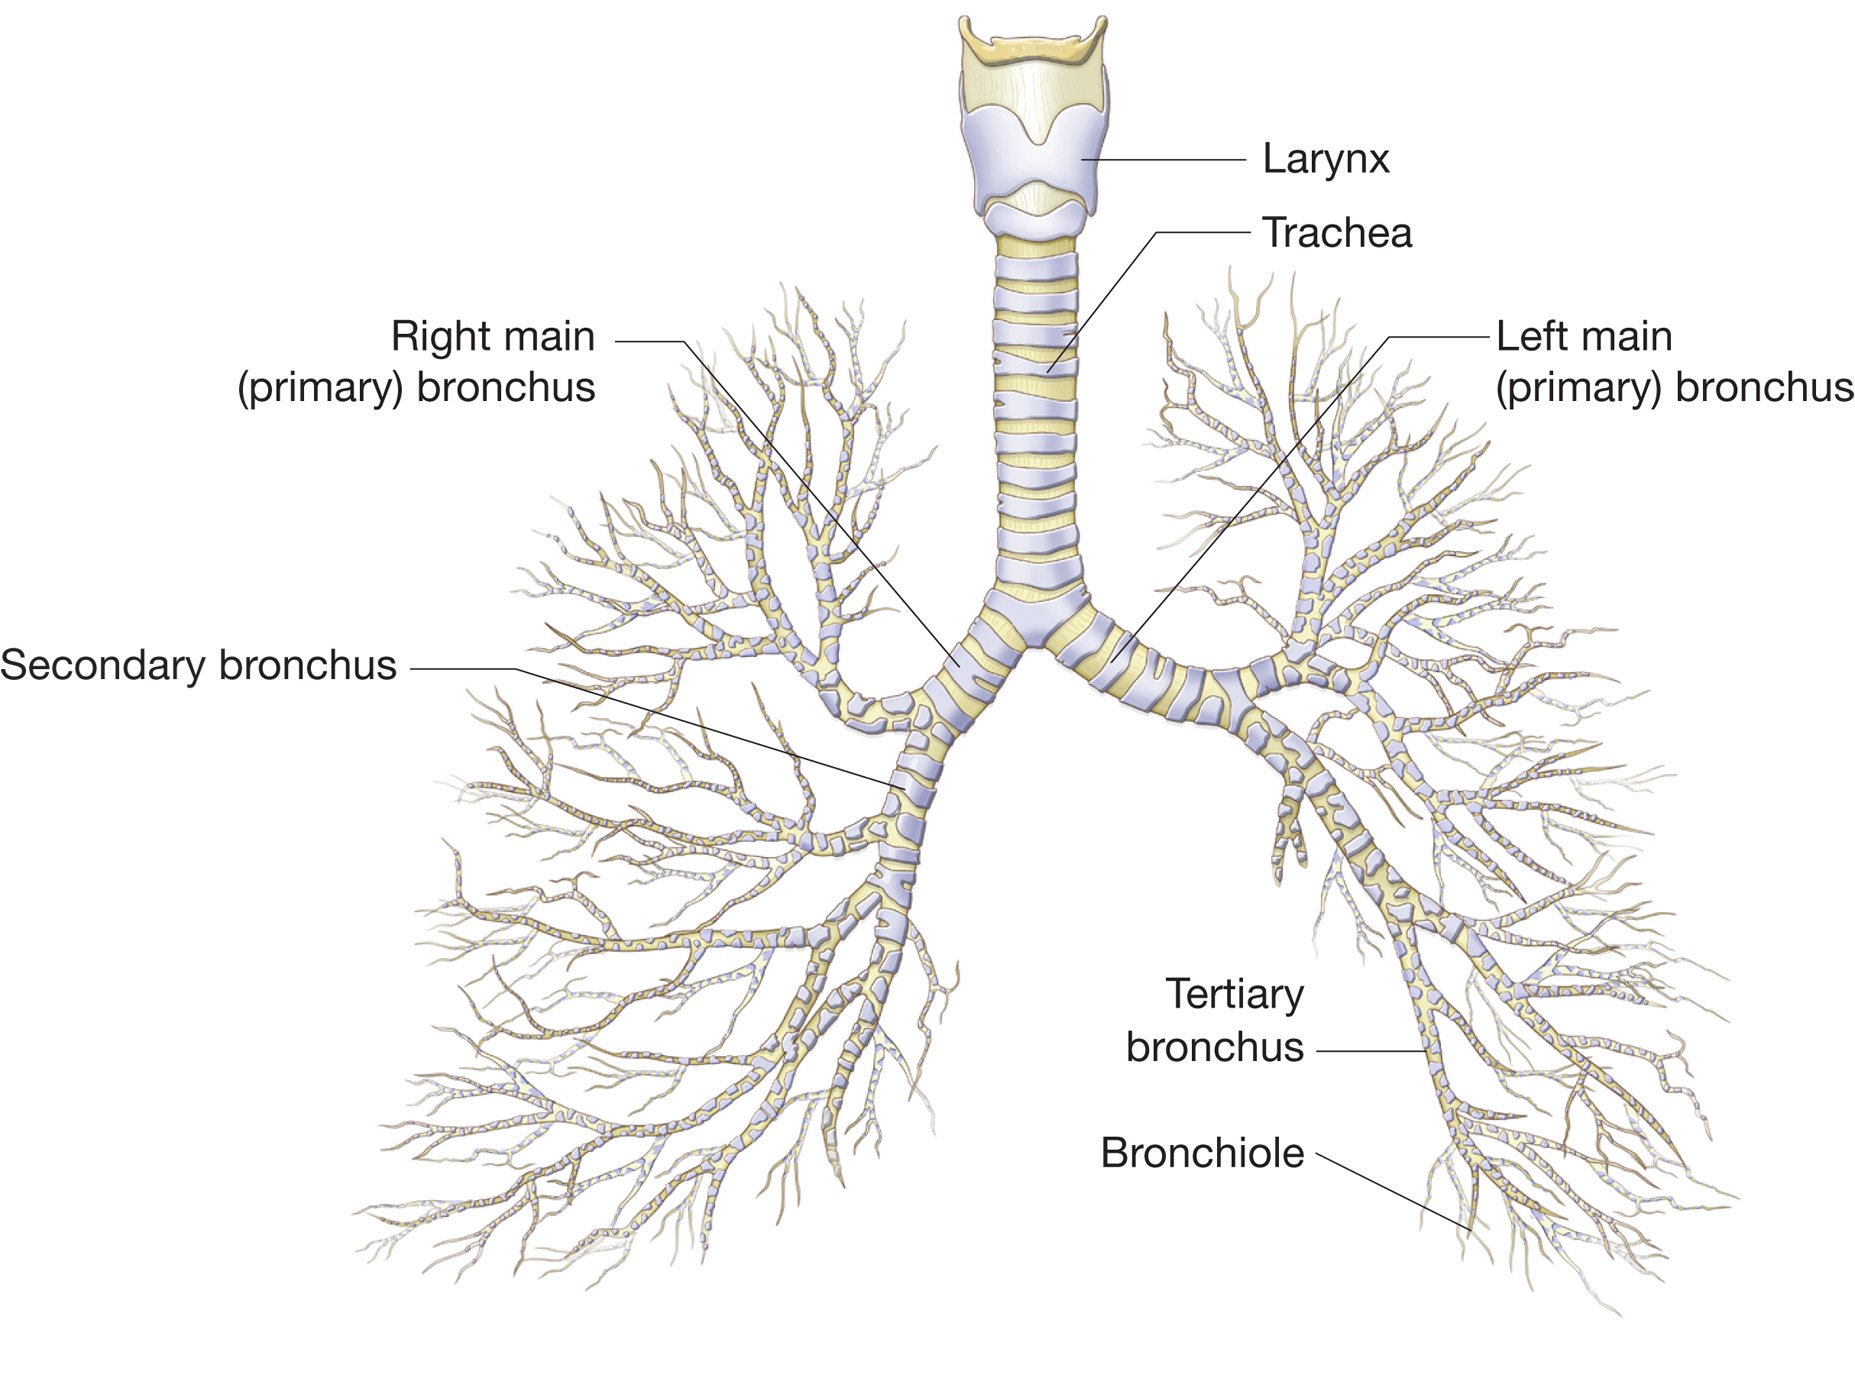 trachea bronchi and terminal bronchioles contribute to anatomic dead space